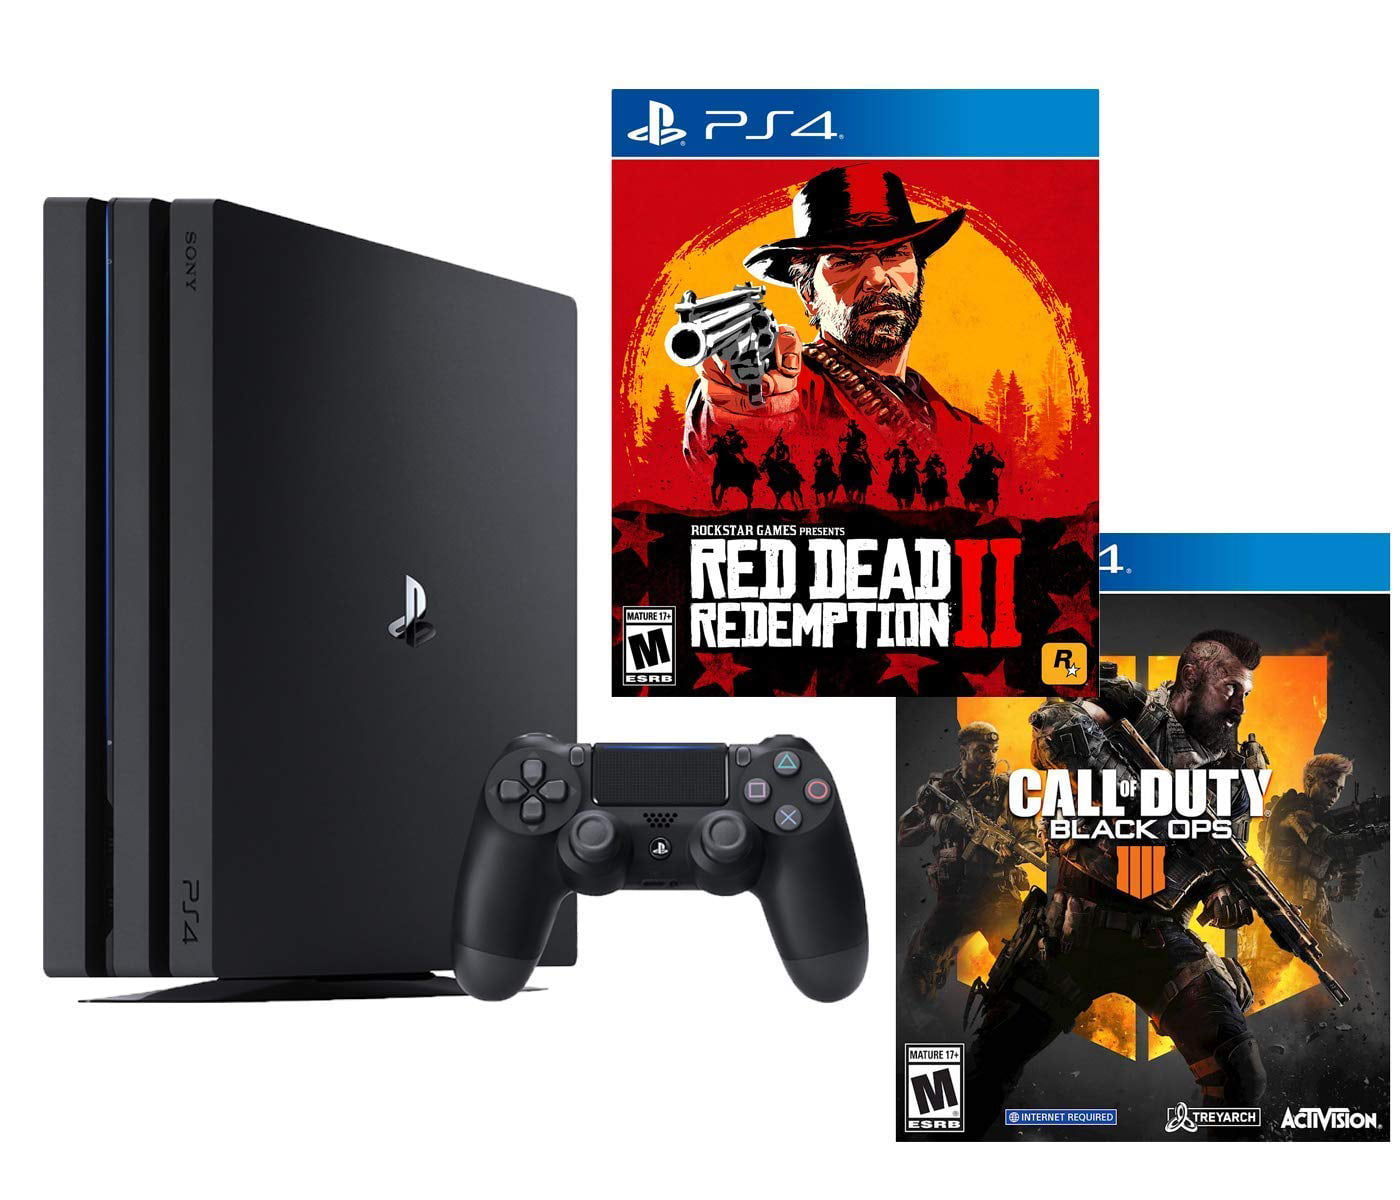 hjul frokost depositum PlayStation 4 PRO Red Dead COD Bundle: RED Dead Redemption 2, Call Duty  Black Ops 4, PlayStation 4 PRO 4K HDR 1TB Console - Walmart.com